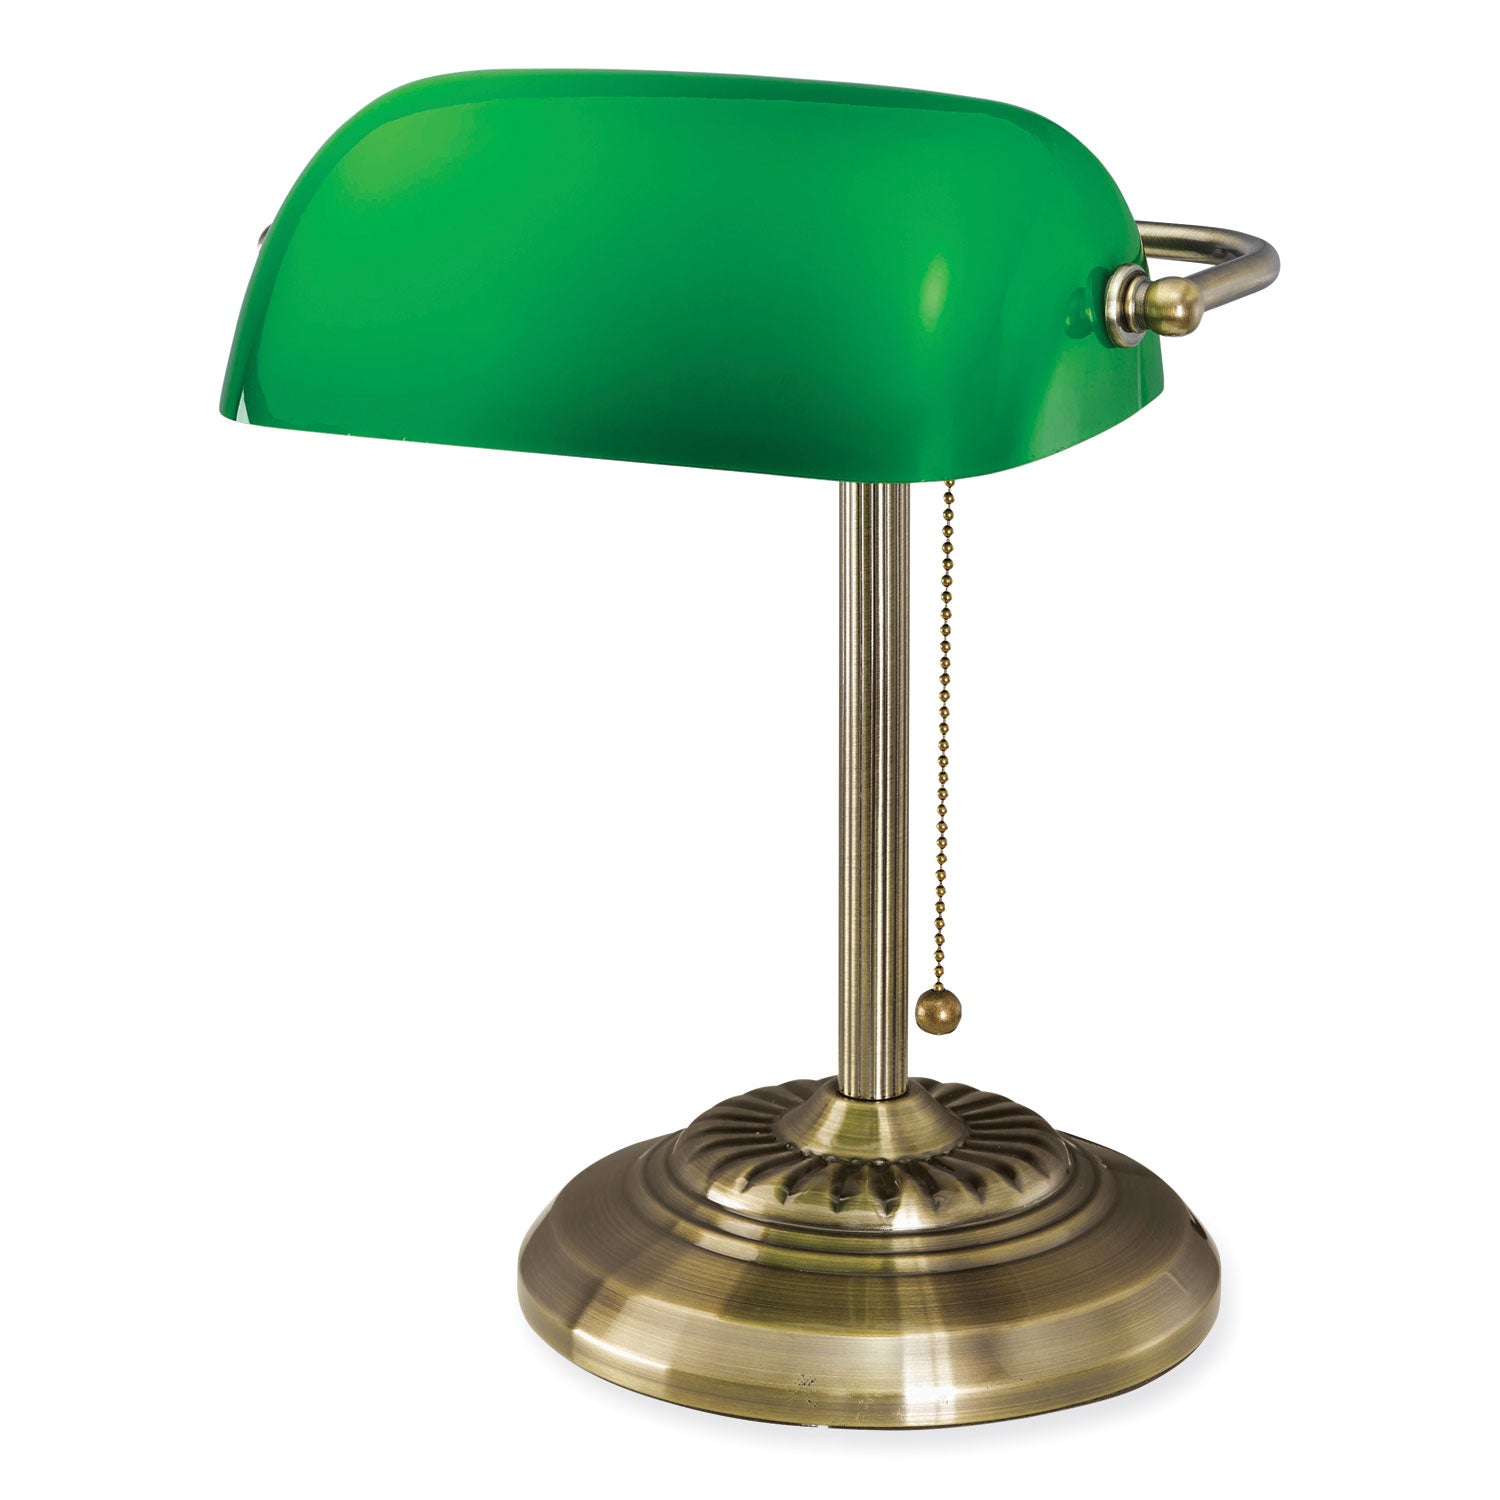 led-bankers-lamp-with-green-shade-cable-suspension-neck-135-high-antique-brass-ships-in-4-6-business-days_vlu9b101ab - 1